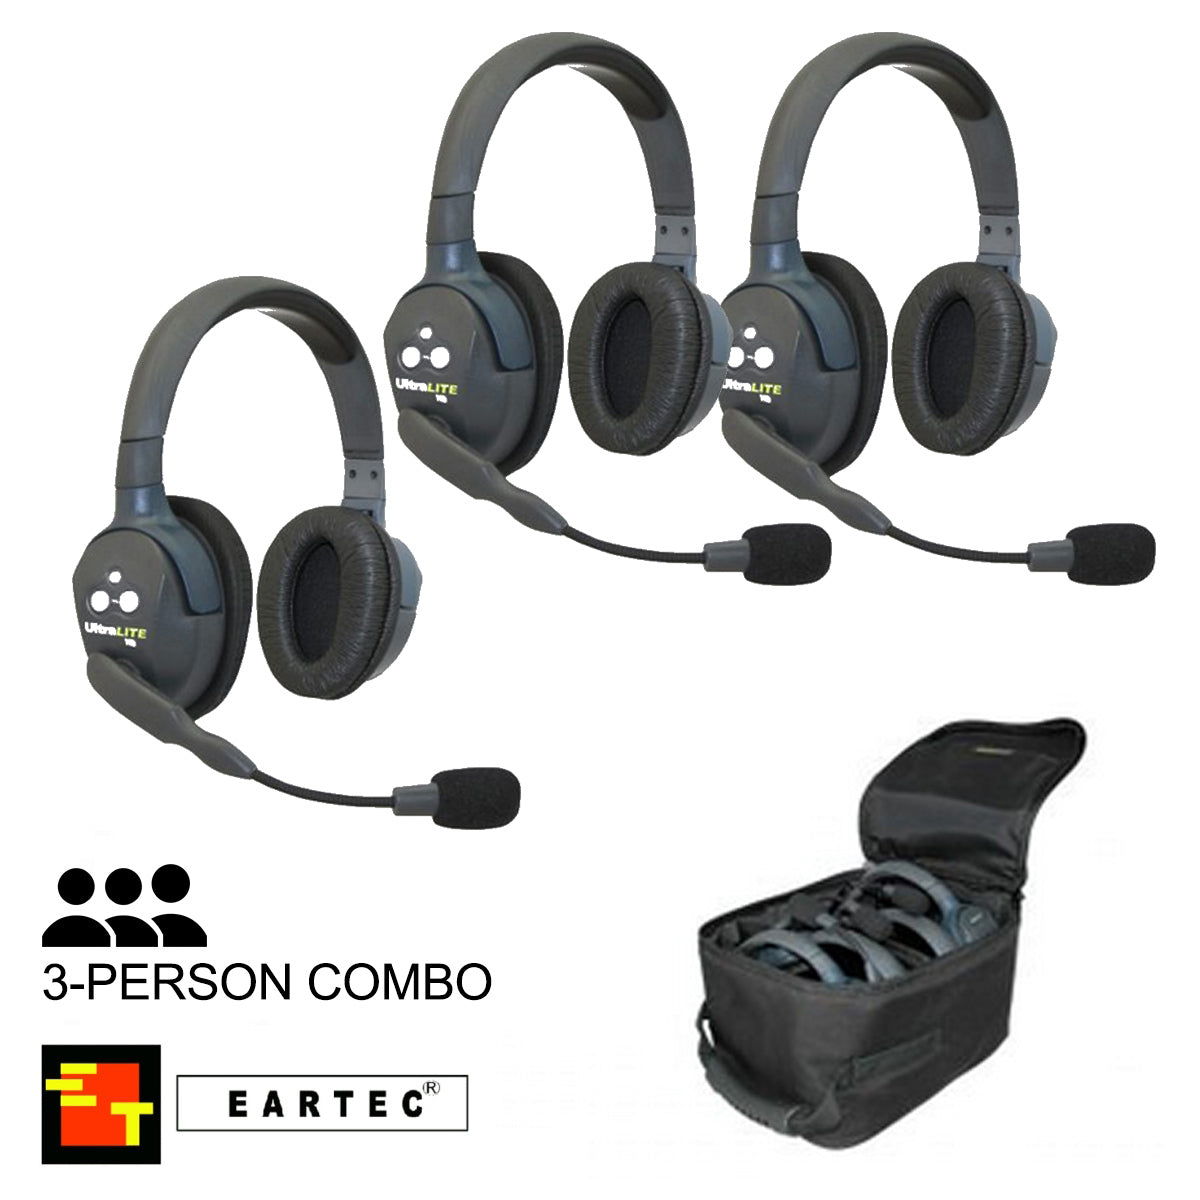 UltraLITE 3-Person Hands Free Radio Headset Combo – Influential Drones